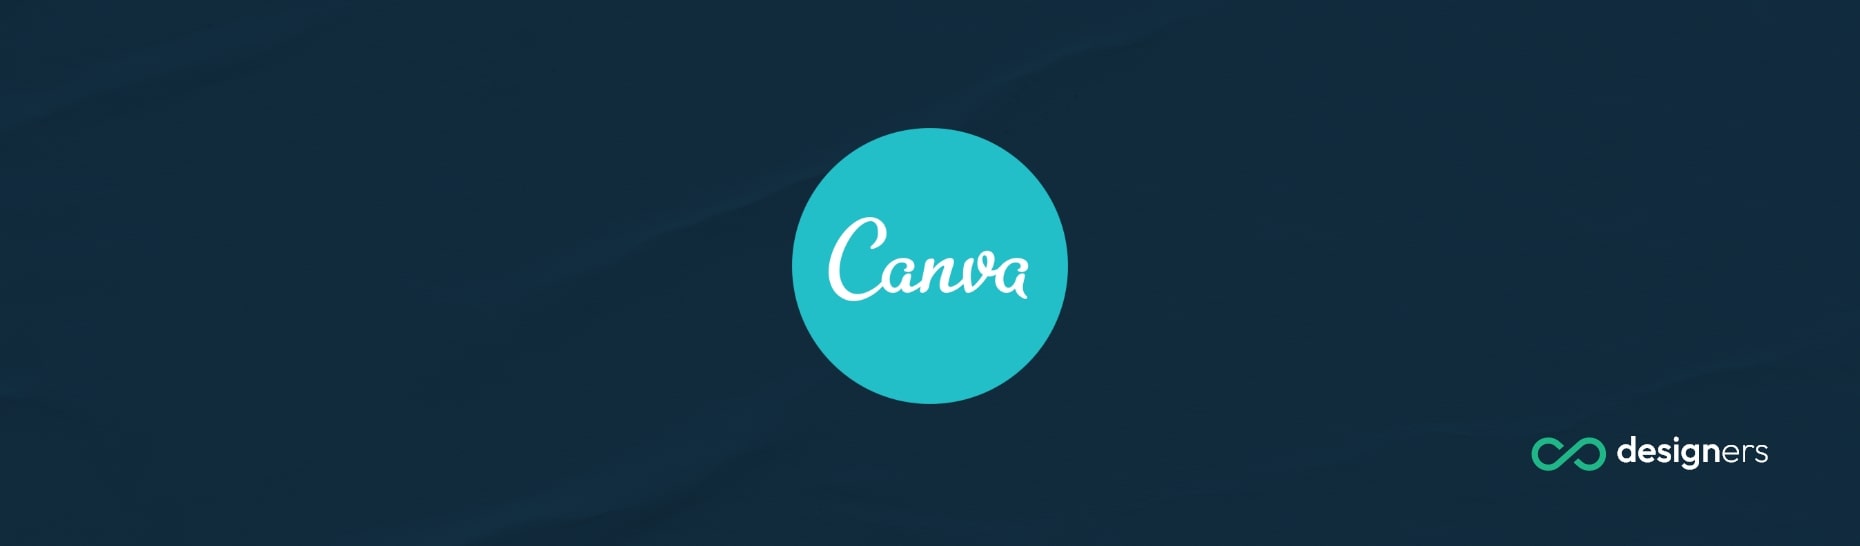 How Do You Make Rounded Corners in Canva?